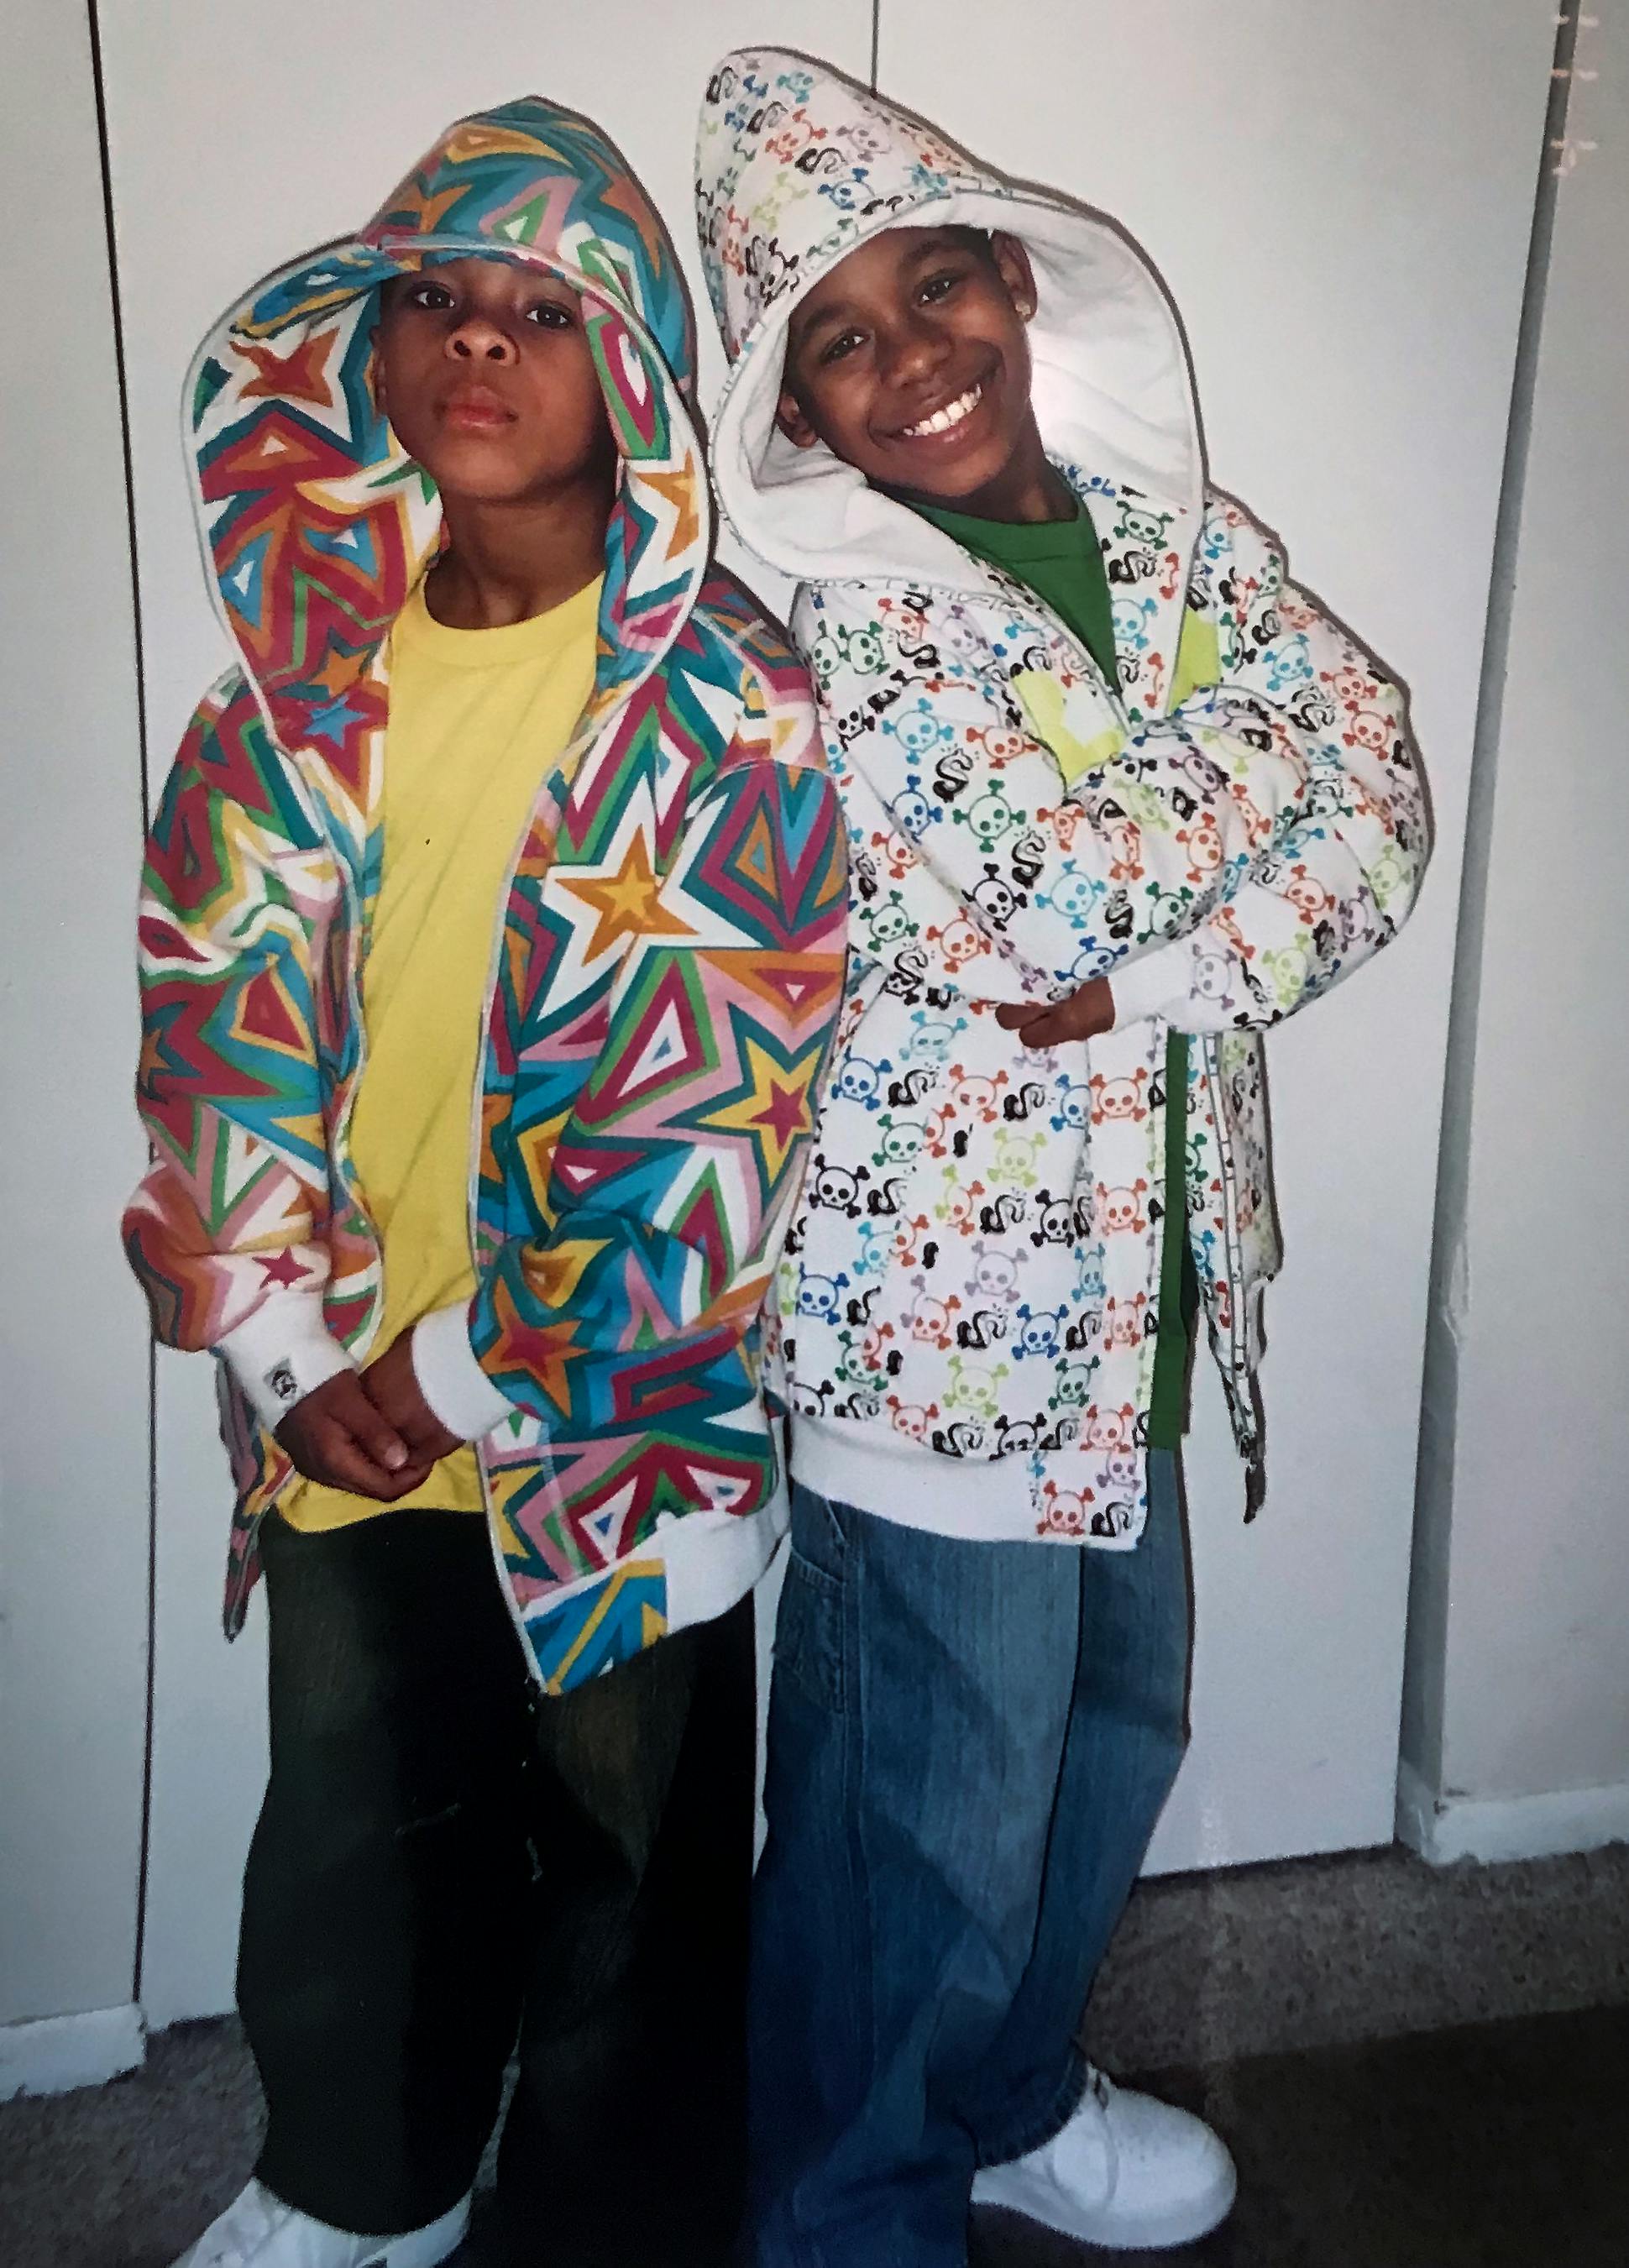 Amir Locke, left, and his older brother, Andre Jr., were two years apart and inseparable growing up. Both were passionate about music, often promoting each other’s songs.